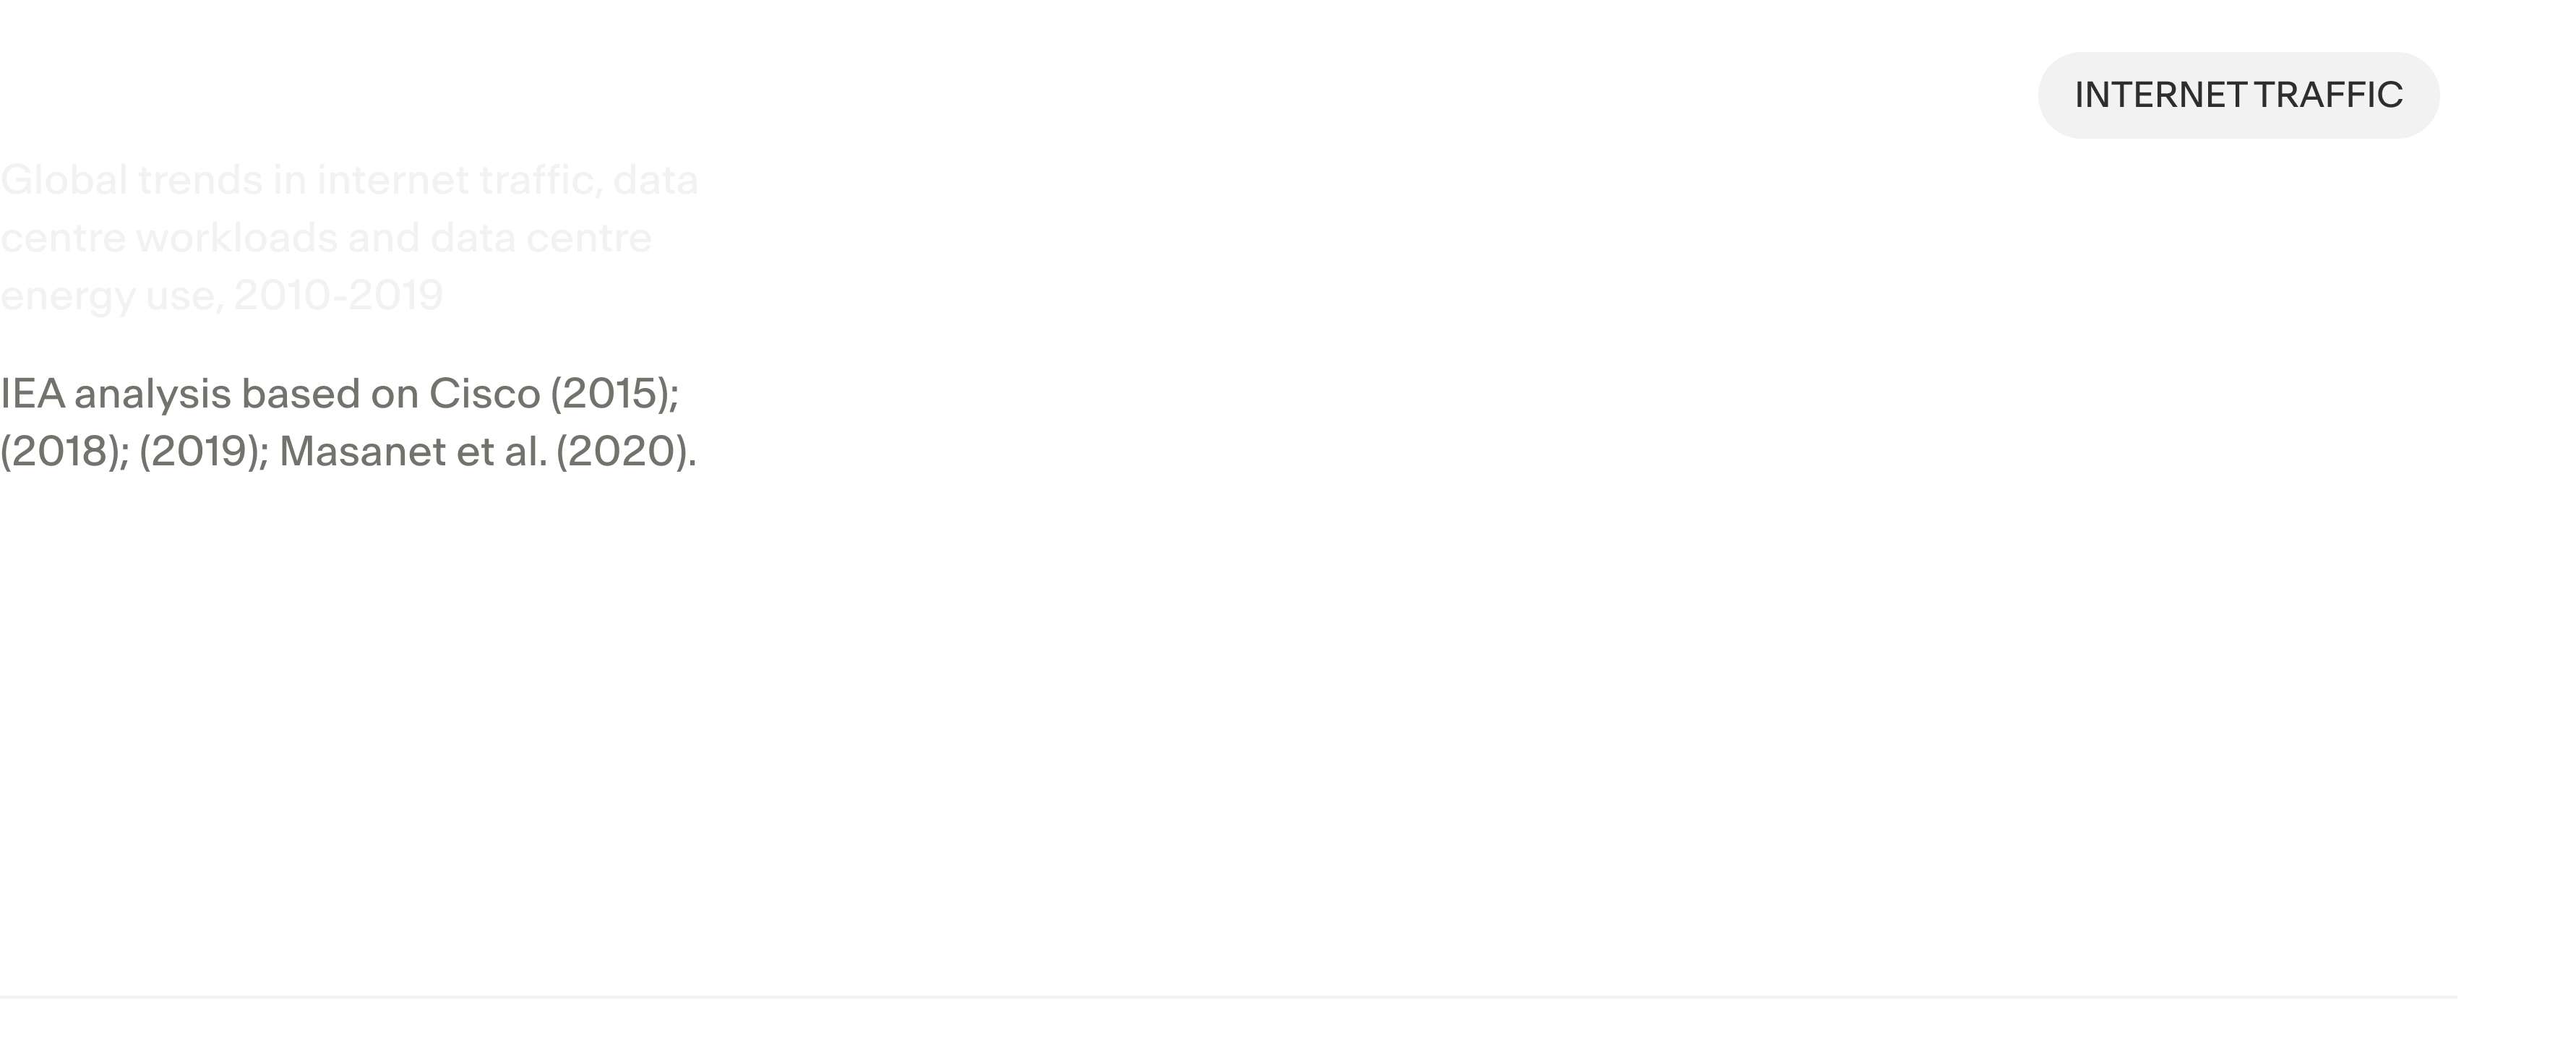 graph showing internet usage over time